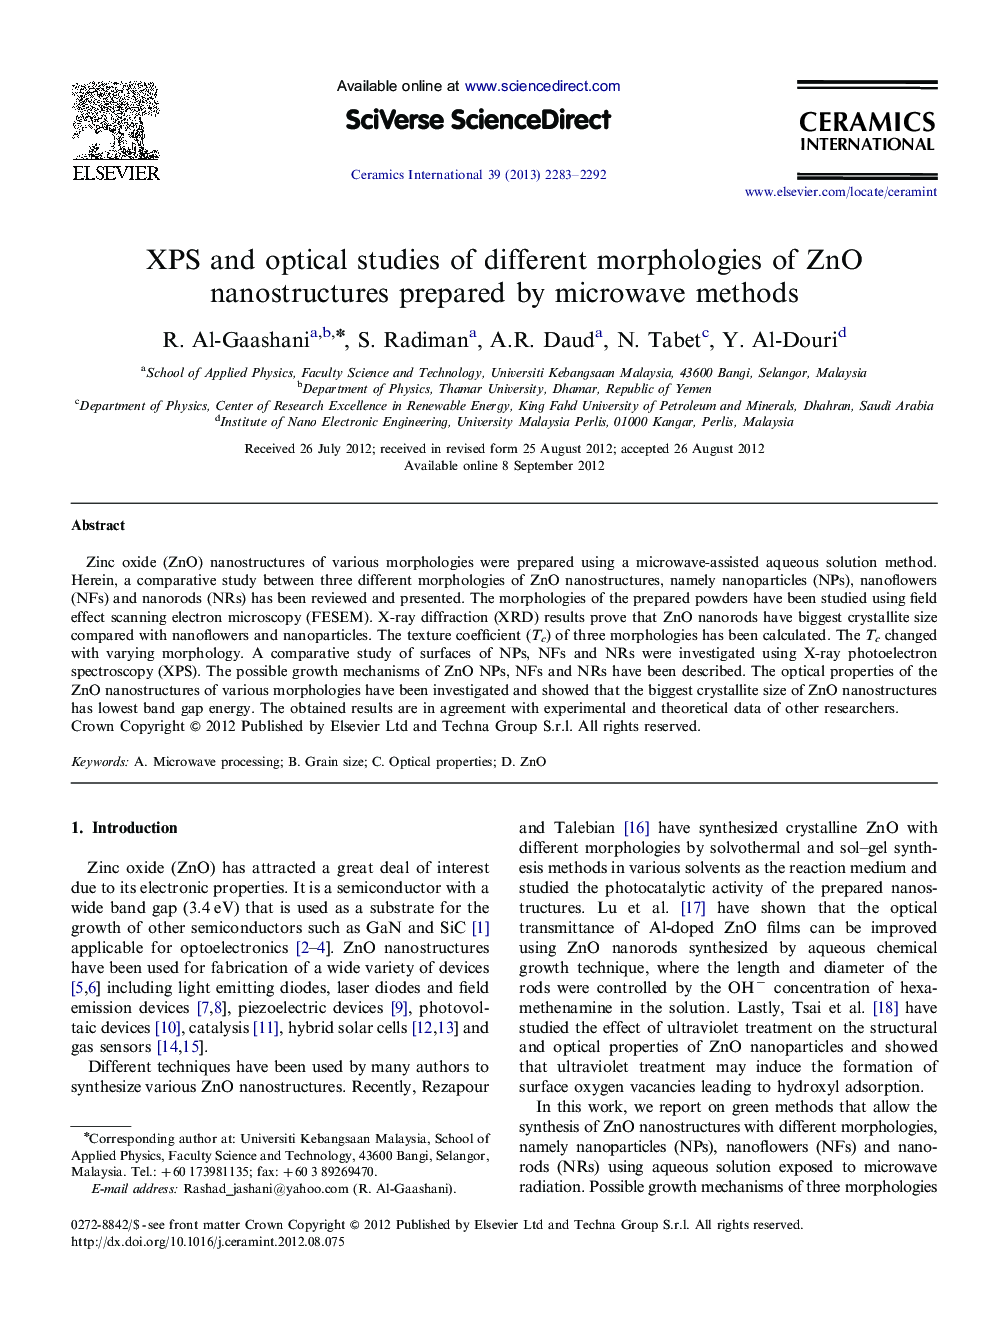 XPS and optical studies of different morphologies of ZnO nanostructures prepared by microwave methods